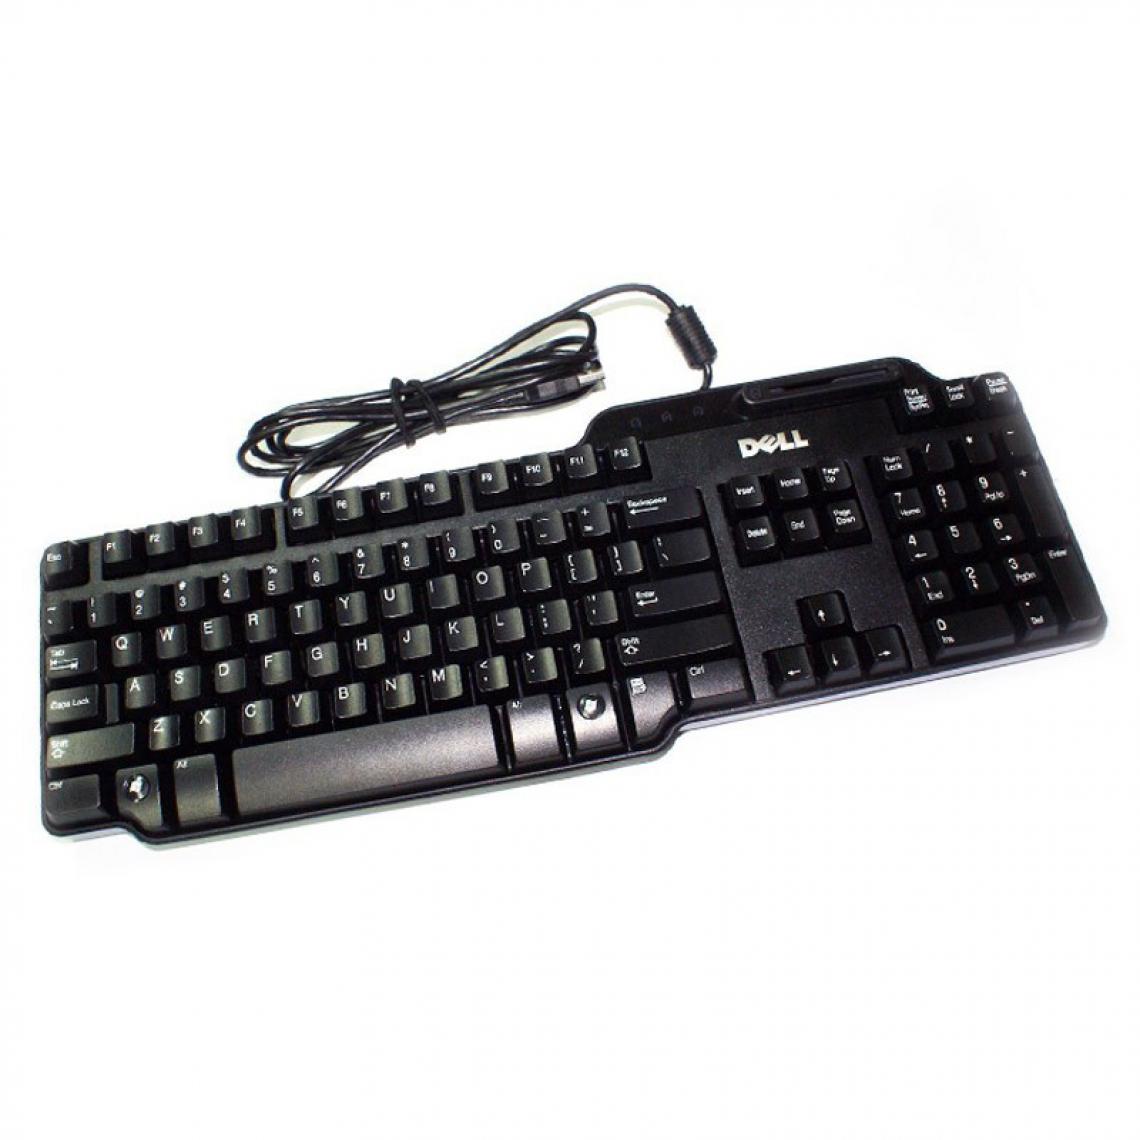 Dell - Clavier PC Azerty USB Dell SK-3205 KW240 NY559 KW218 104 Touches Lecteur Carte - Clavier